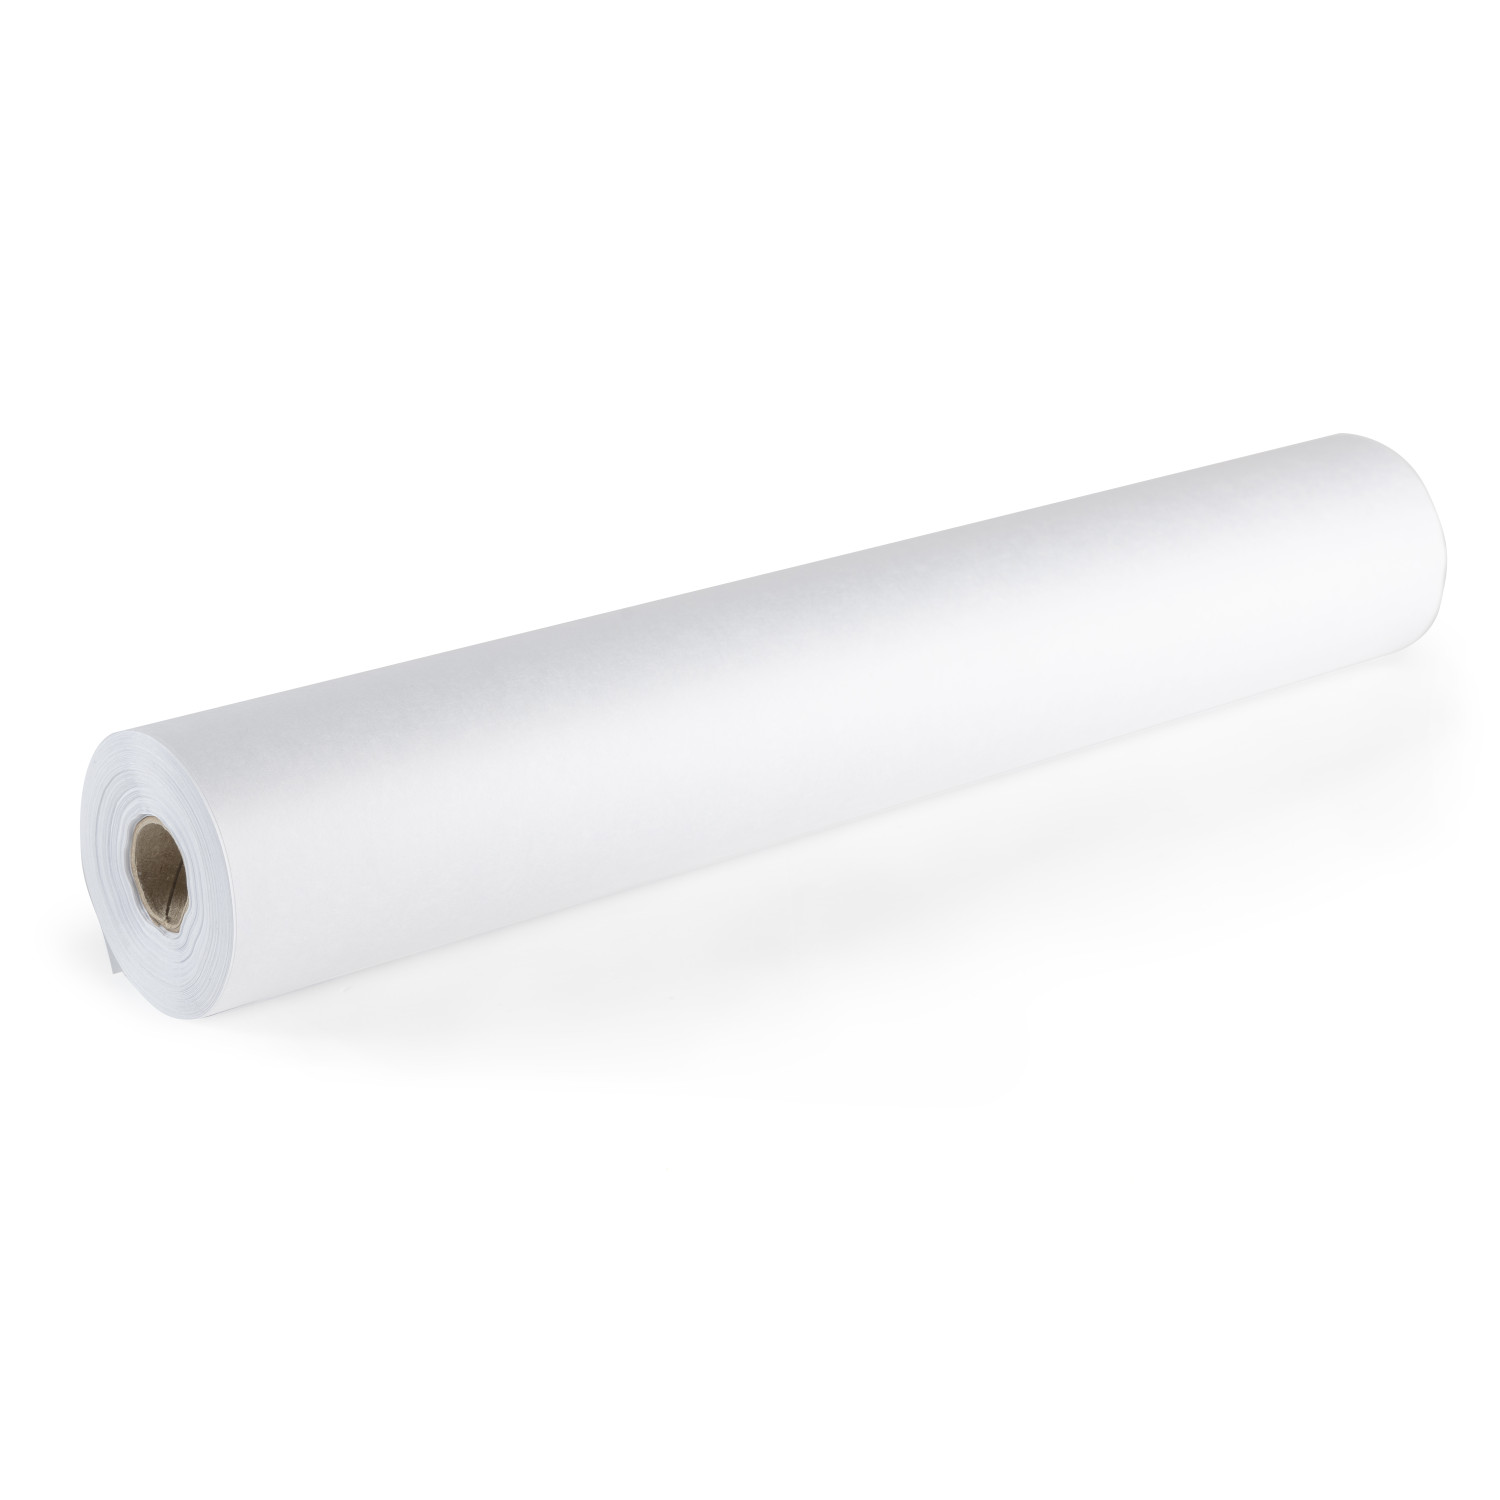 [2 PACK] MG15 White Butcher Food Paper Roll 15-Inch - Roll for Butcher,  Freezer Paper, Food Service, Meat Paper, Freezer Roll by EcoQuality